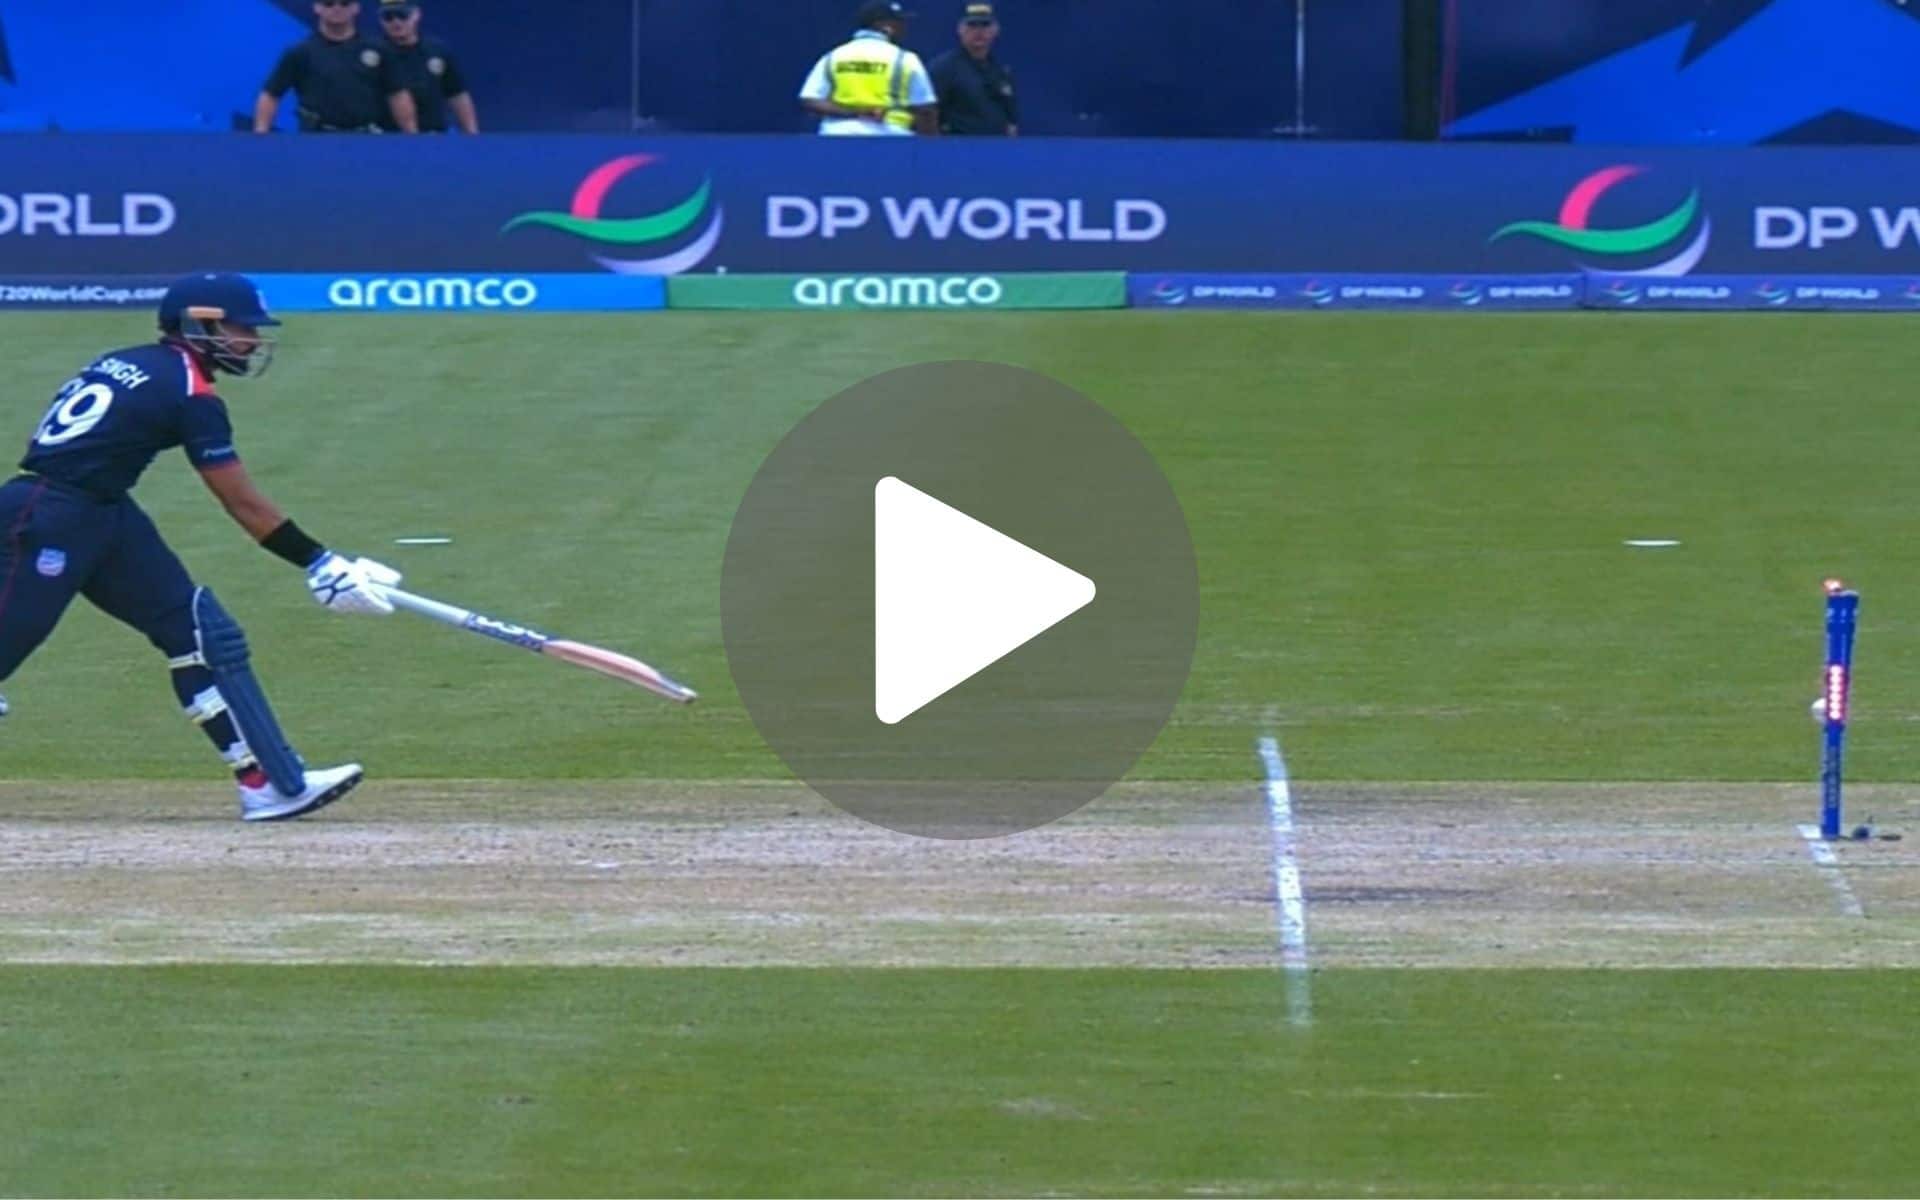 [Watch] Pant-Siraj's Tag Team Effort Produce Stunning Run Out To Clean Up USA For 110